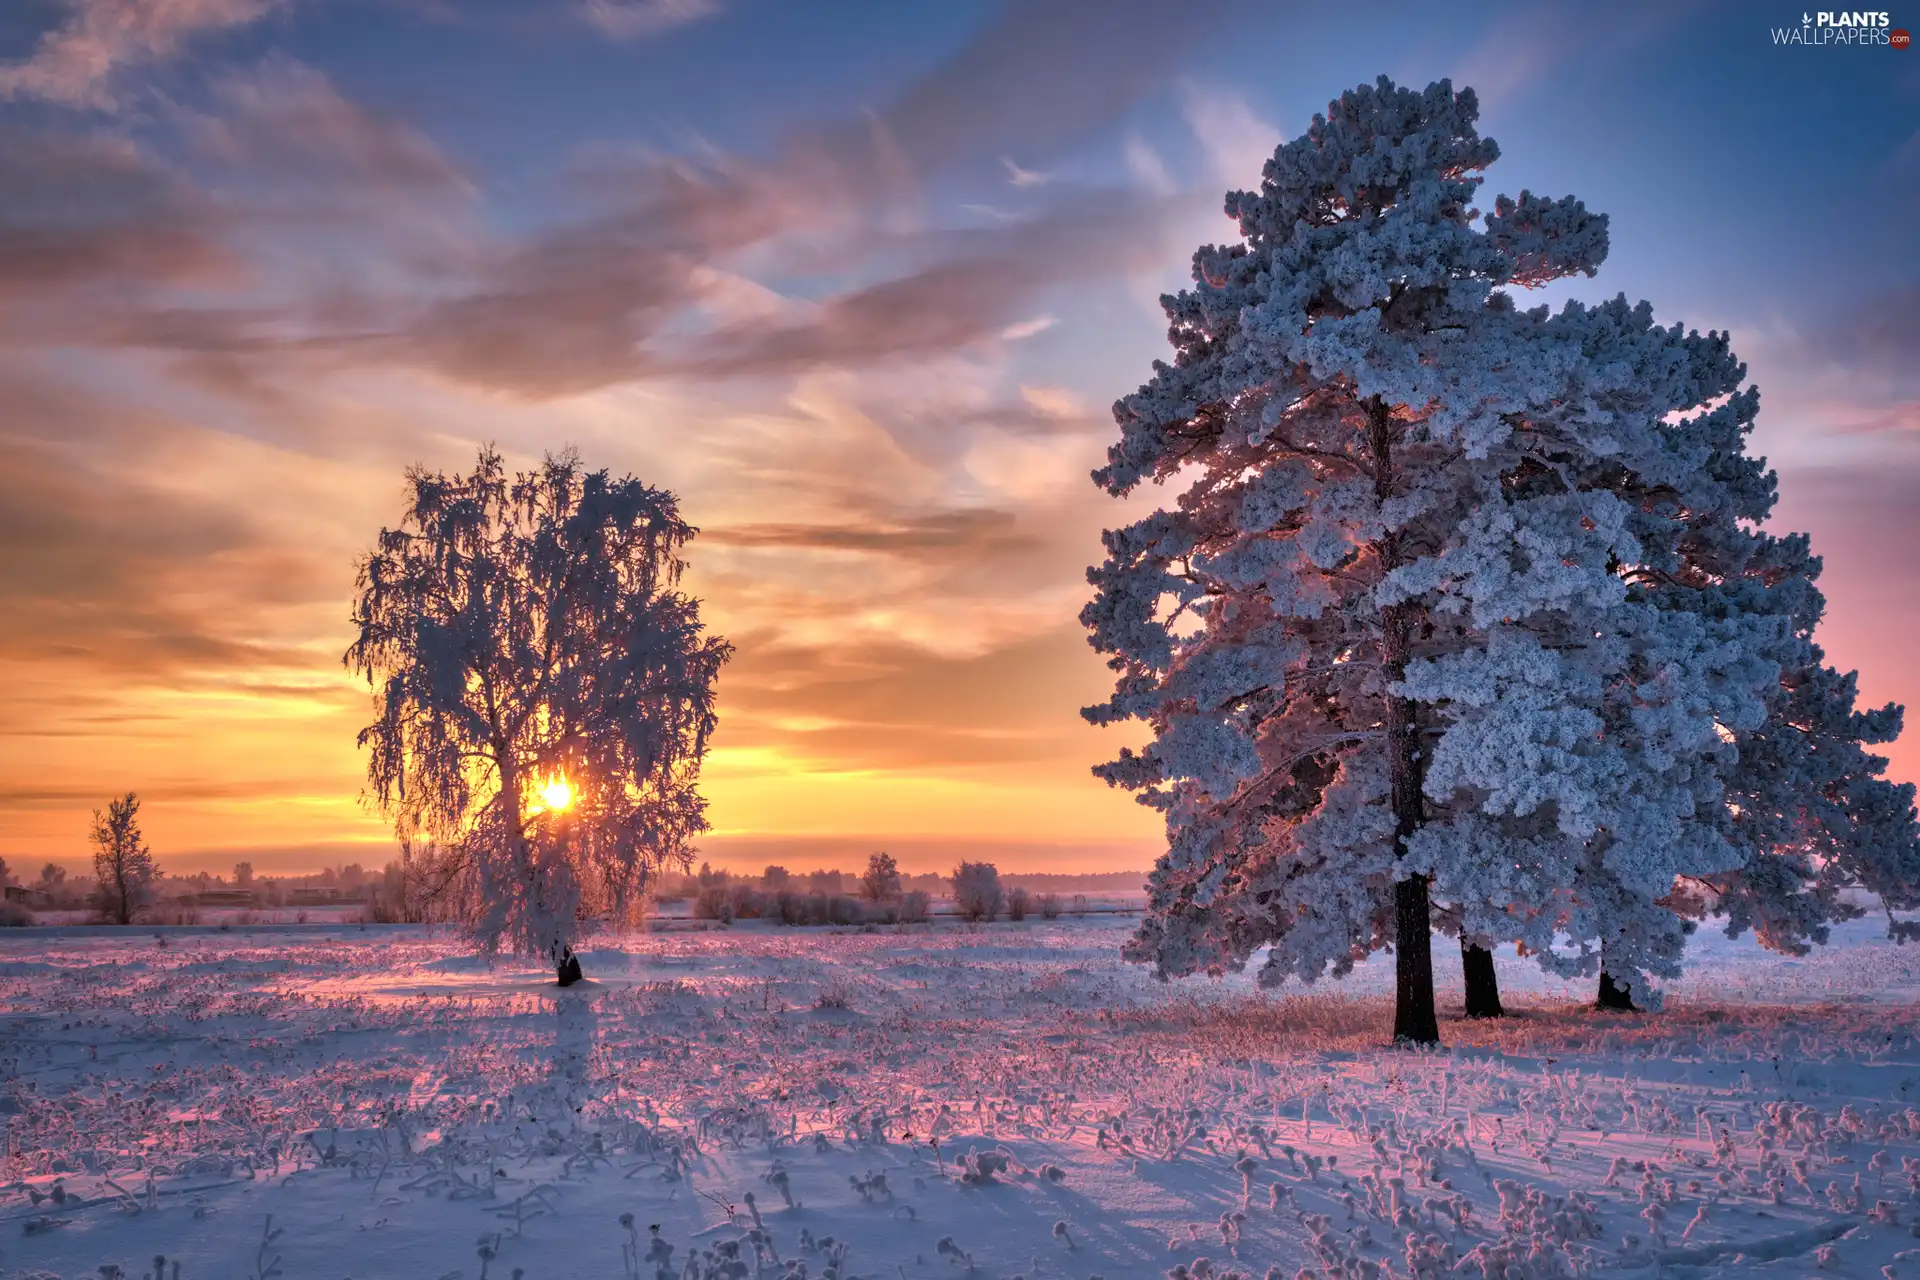 grass, Sunrise, trees, viewes, Snowy